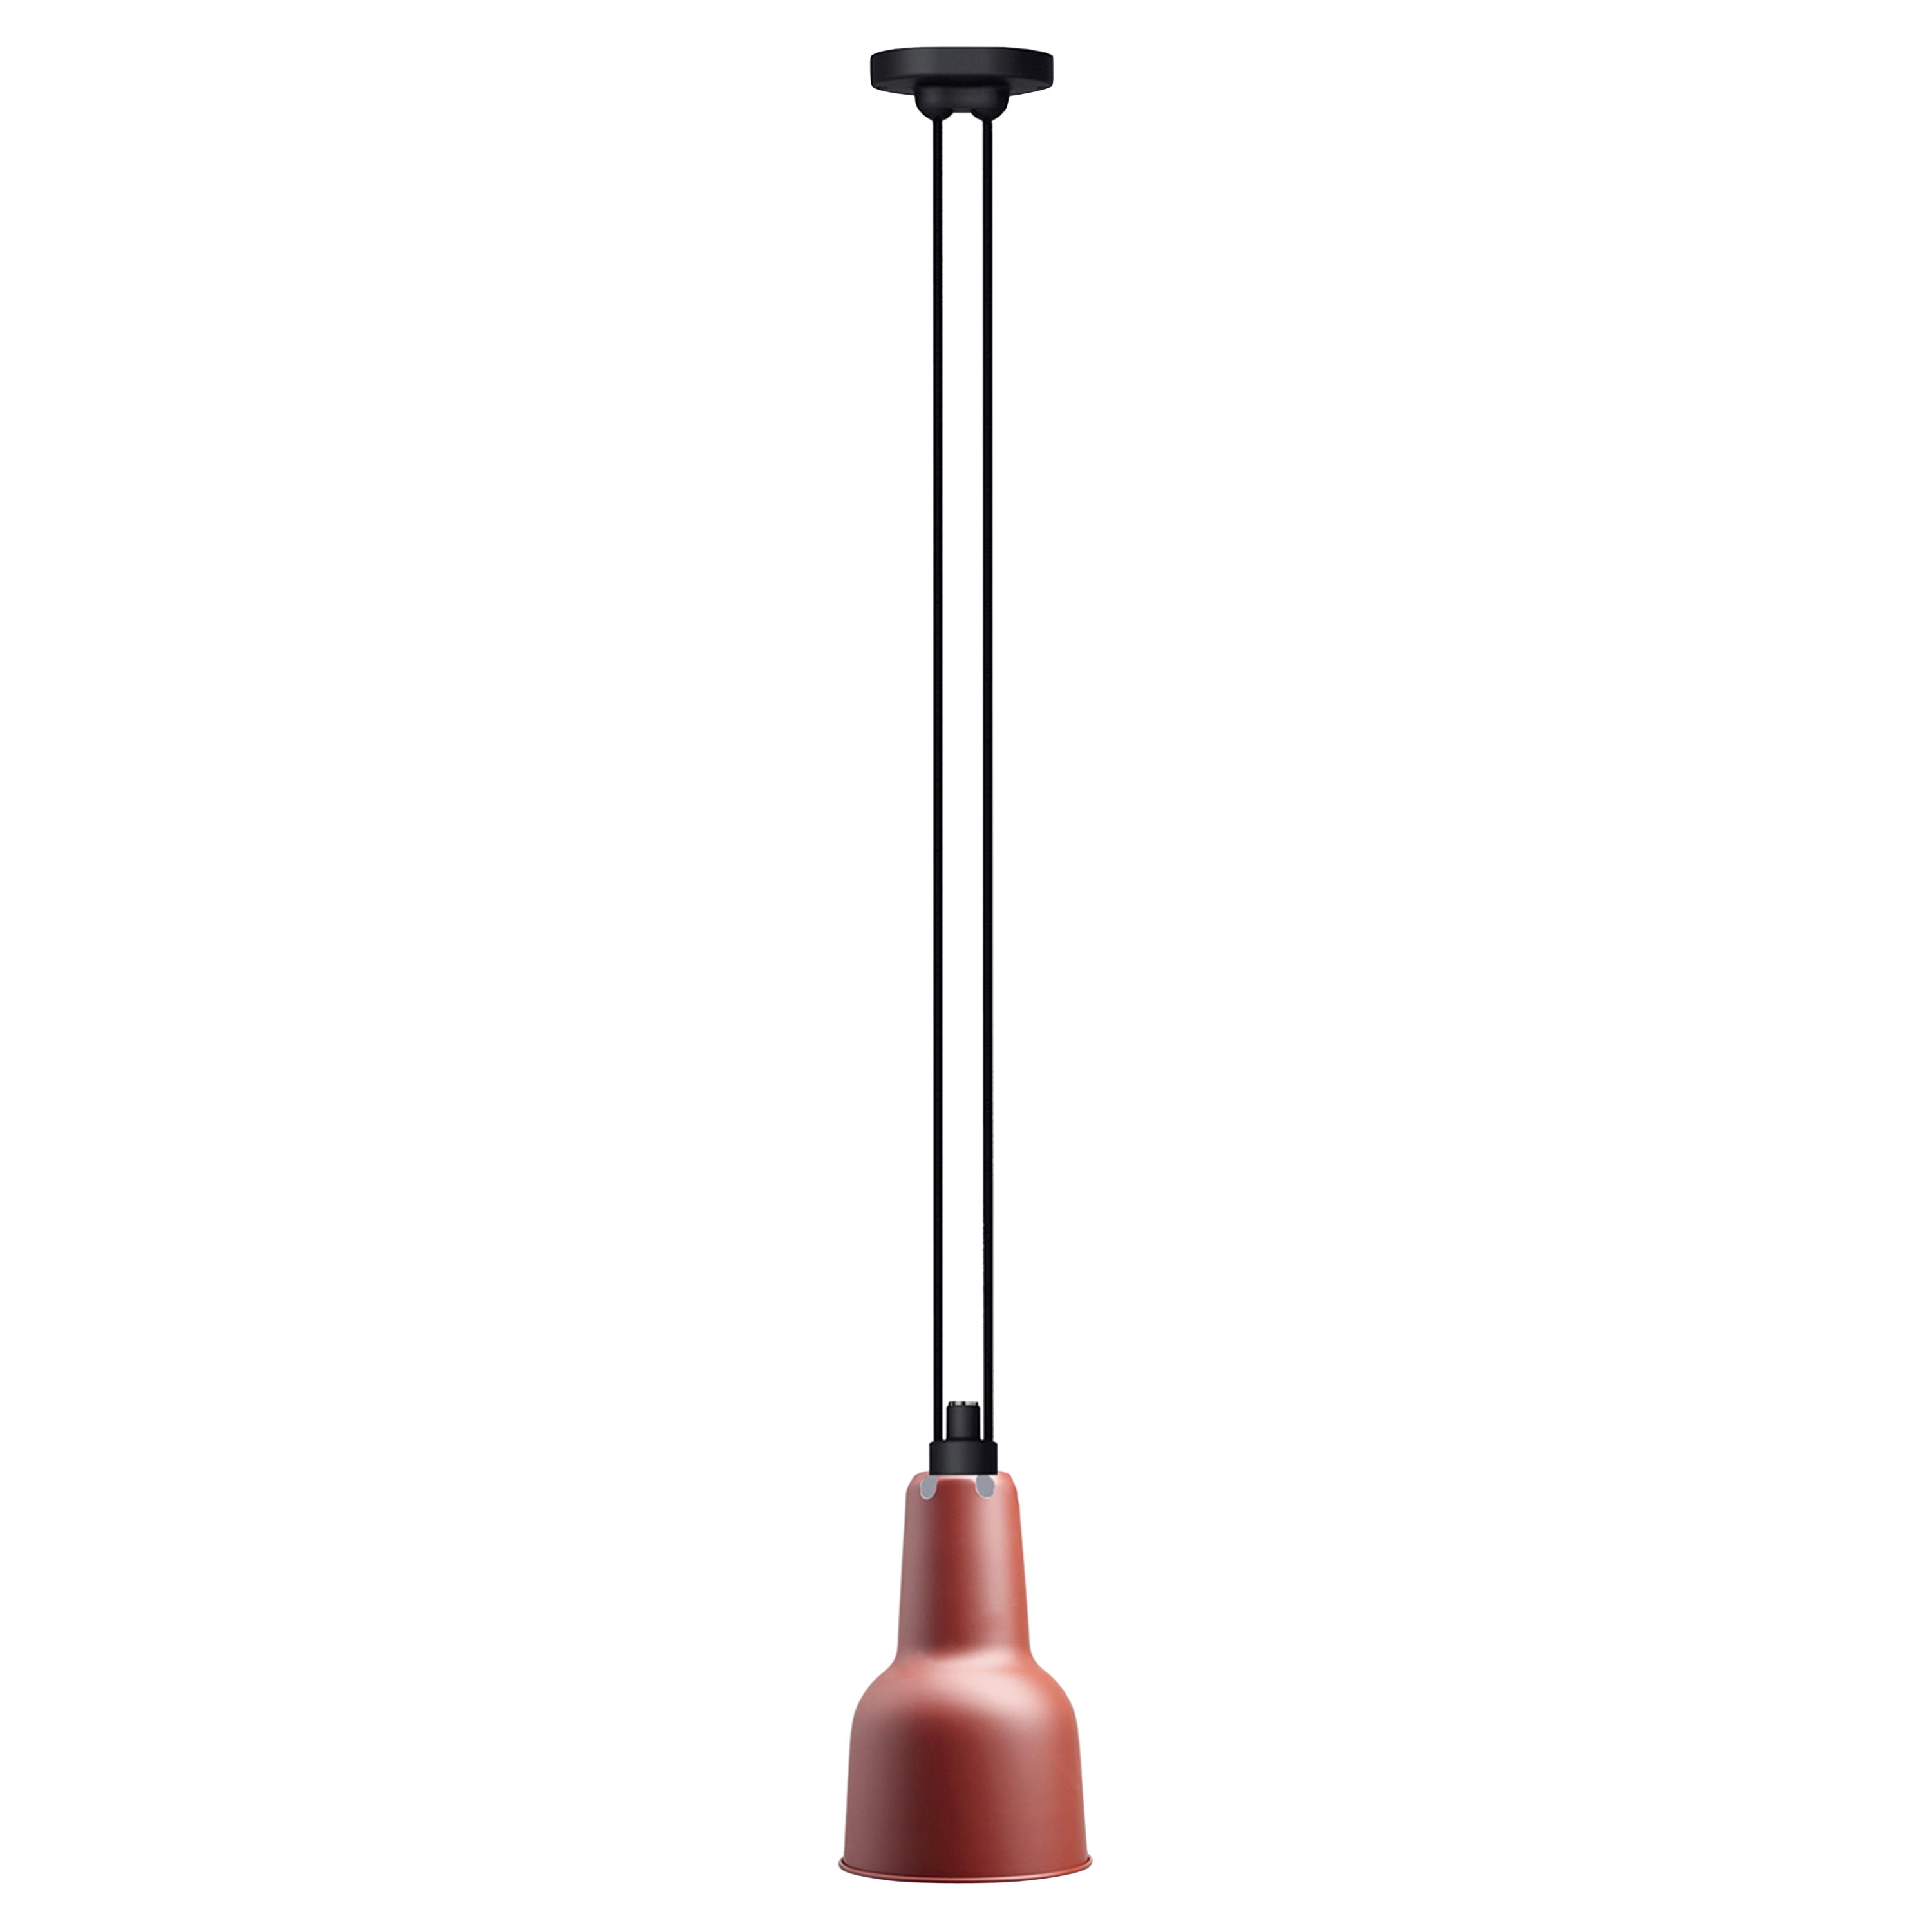 DCW Editions Les Acrobates N°322 Oculist Pendant Lamp in Red Shade For Sale